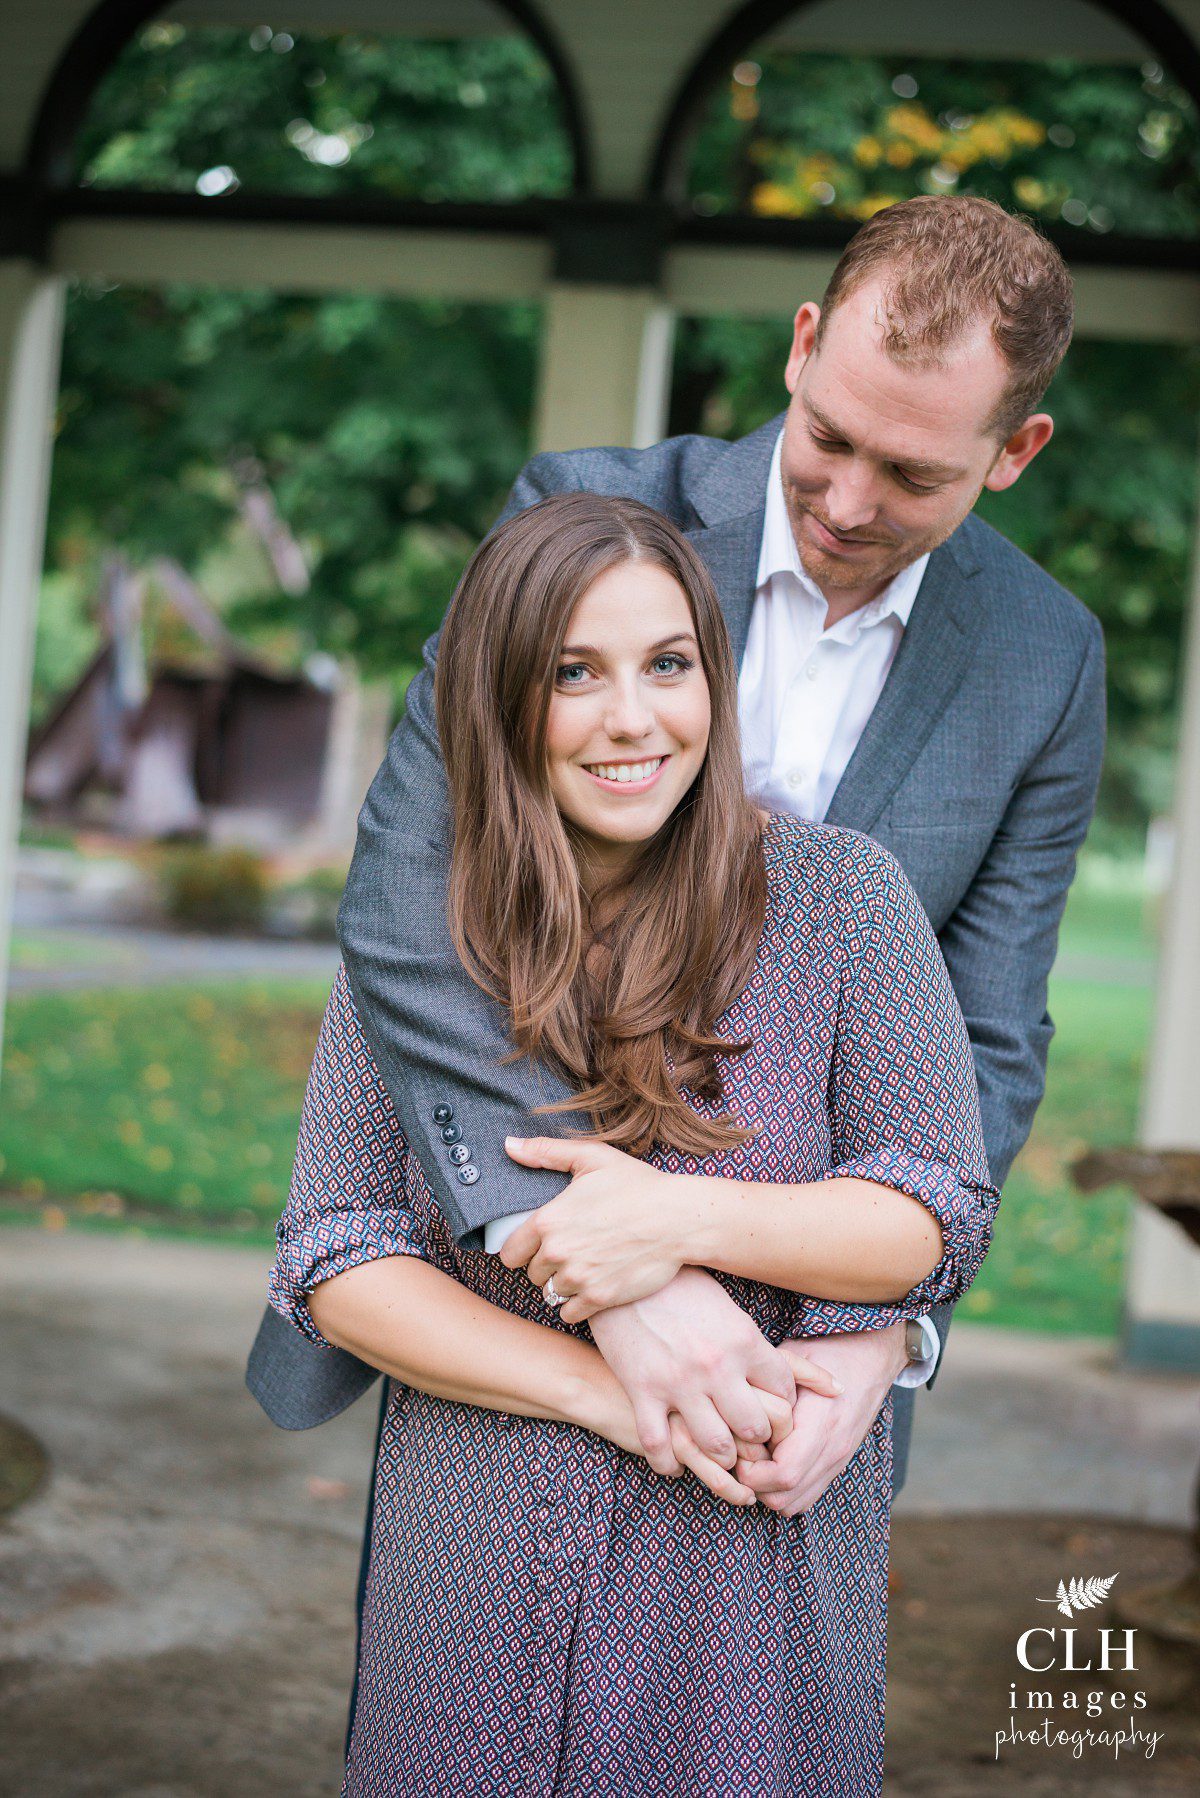 clh-images-photography-saratoga-engagement-photography-capital-district-engagement-photography-saratoga-state-park-photography-amy-and-matt-engagement-photos-37